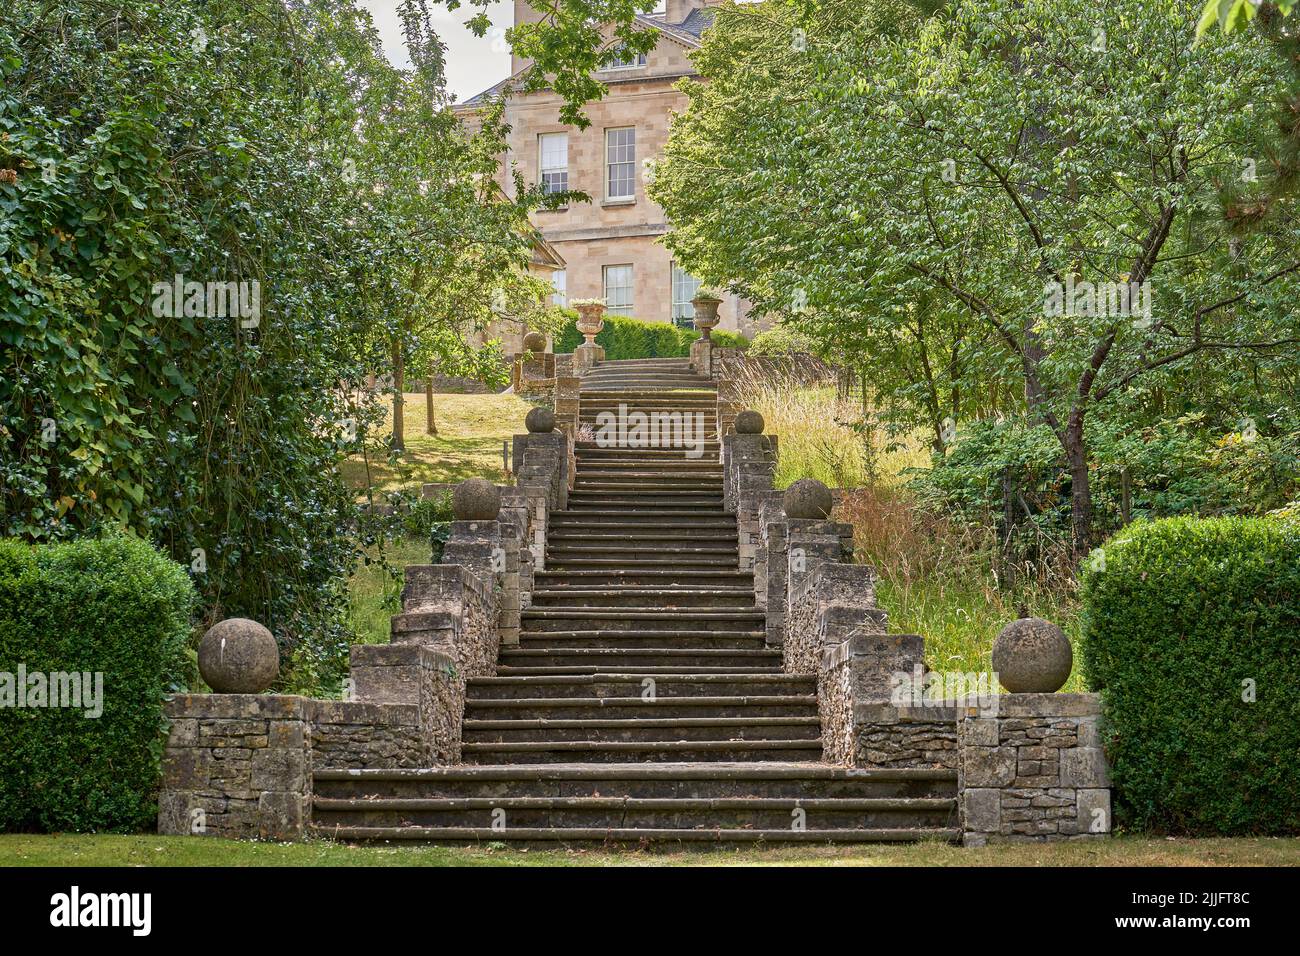 Stone garden steps leading up to a stately home Stock Photo